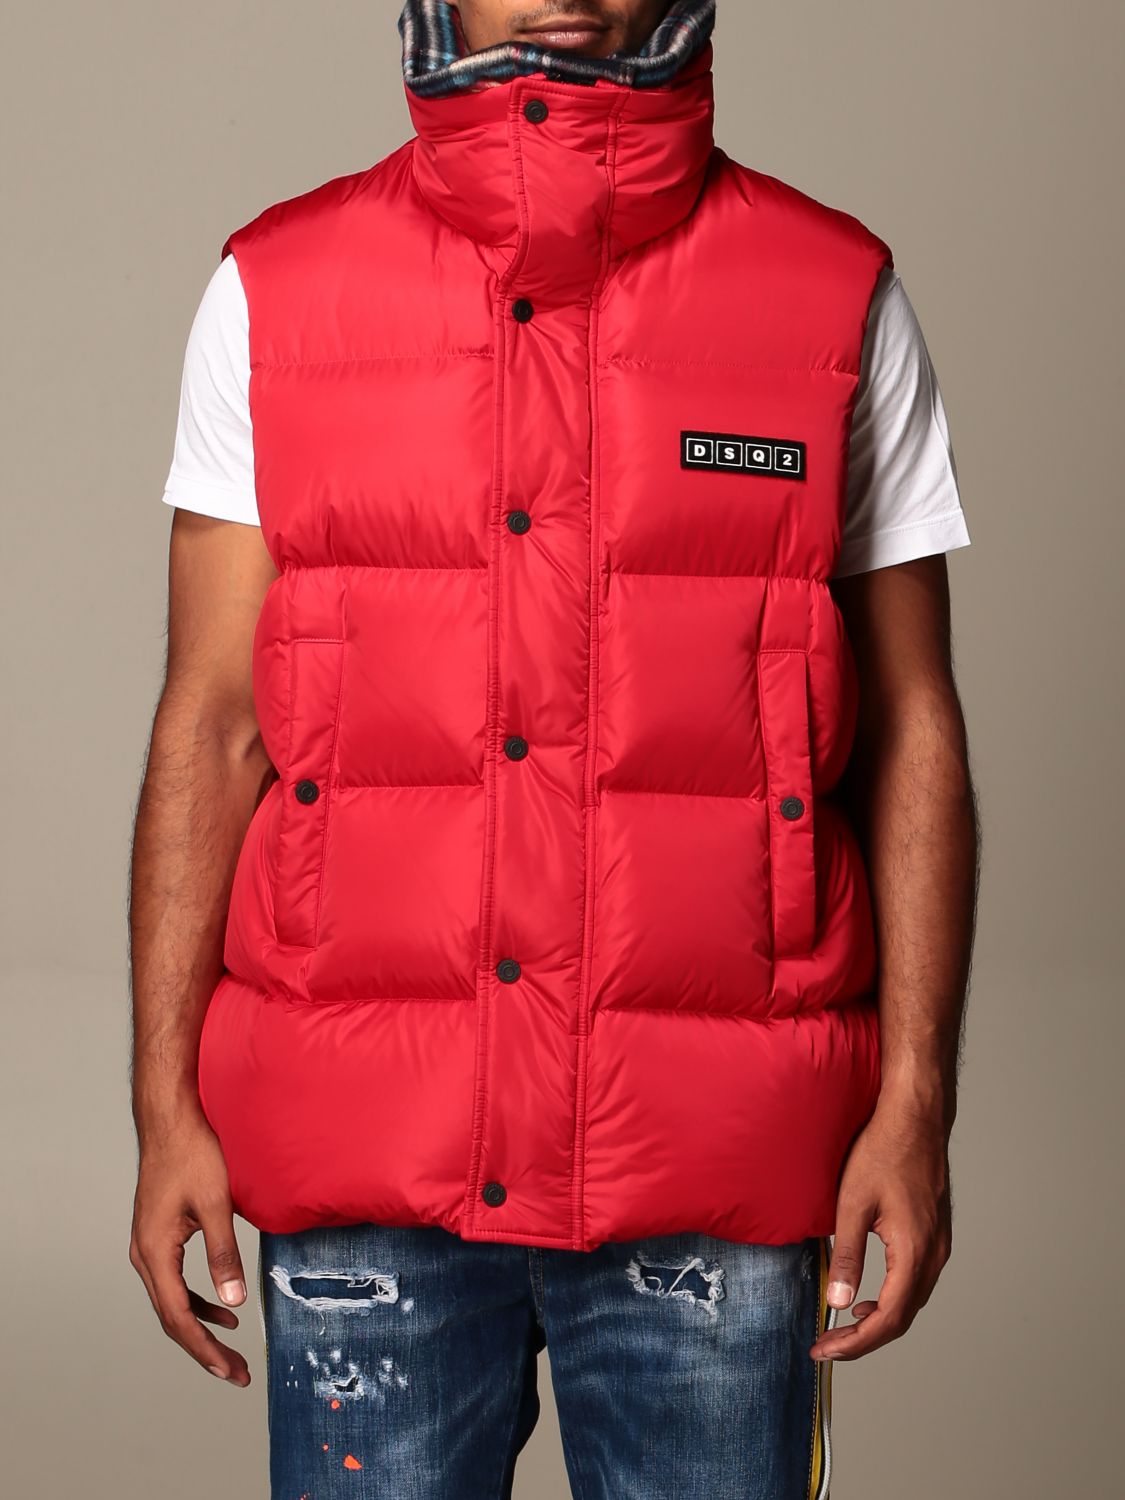 Dsquared2 Outlet: down vest in padded nylon - Red | Dsquared2 suit vest ...